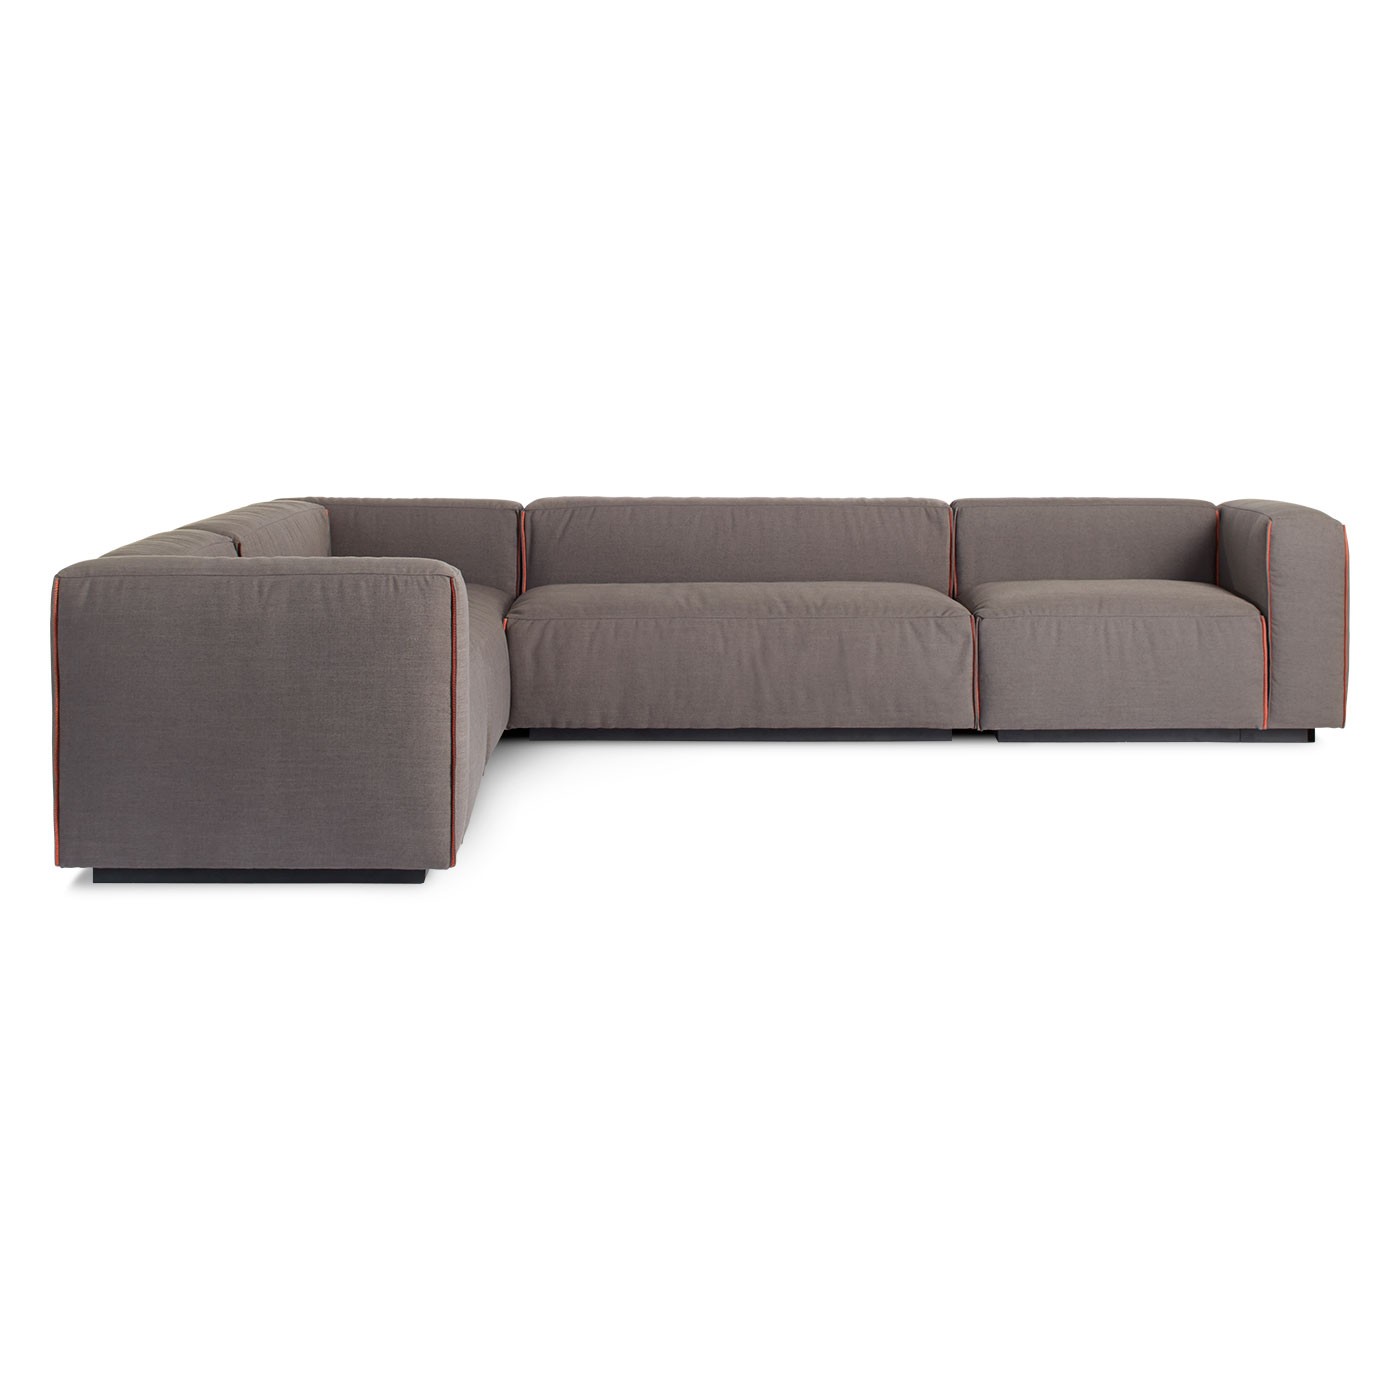 large modern sectional sofas photo - 2